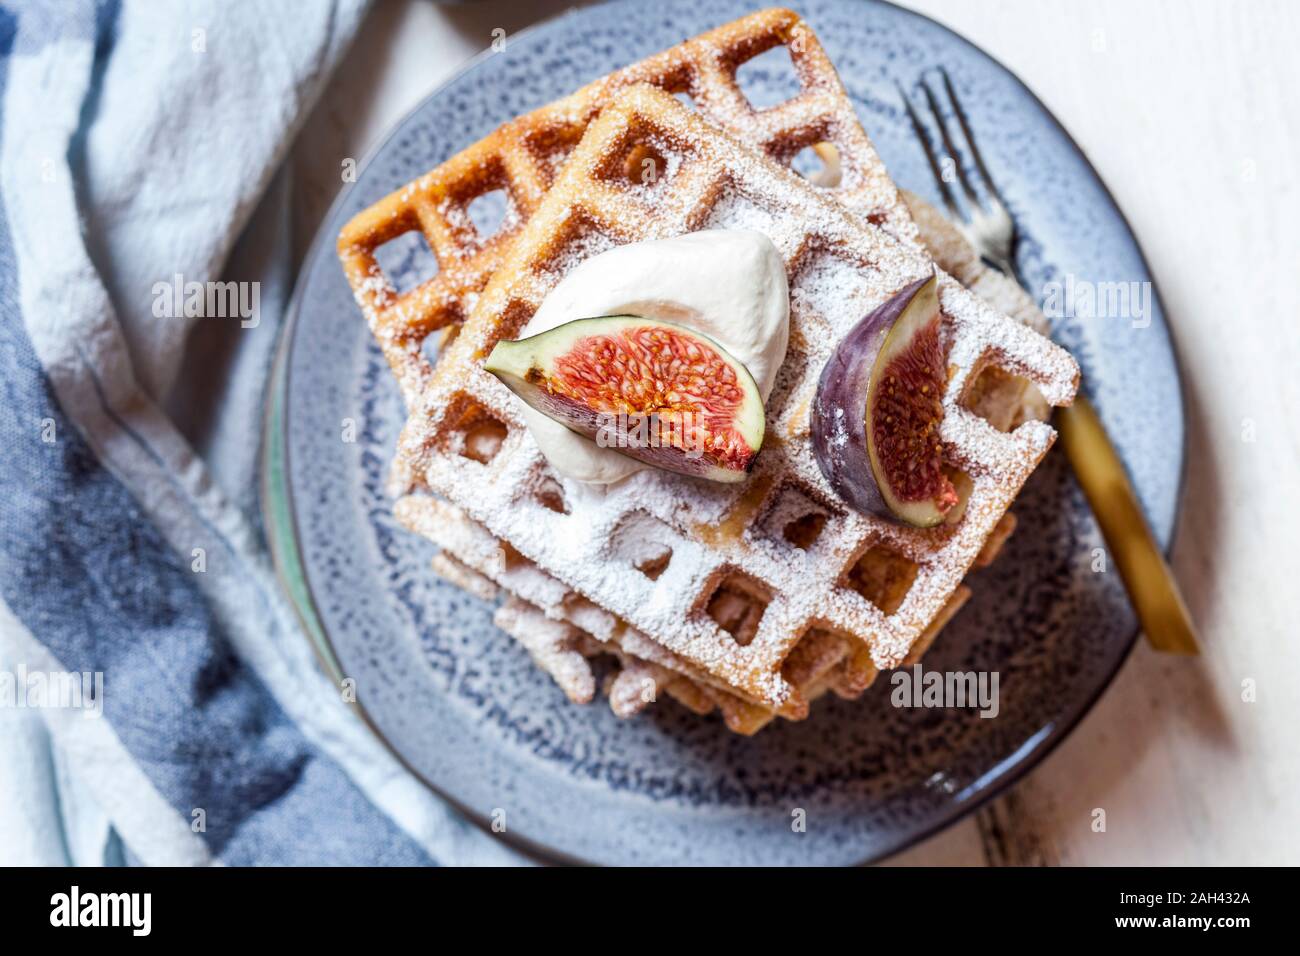 Plate of thick Belgian waffles with whipped cream, powdered sugar and figs Stock Photo